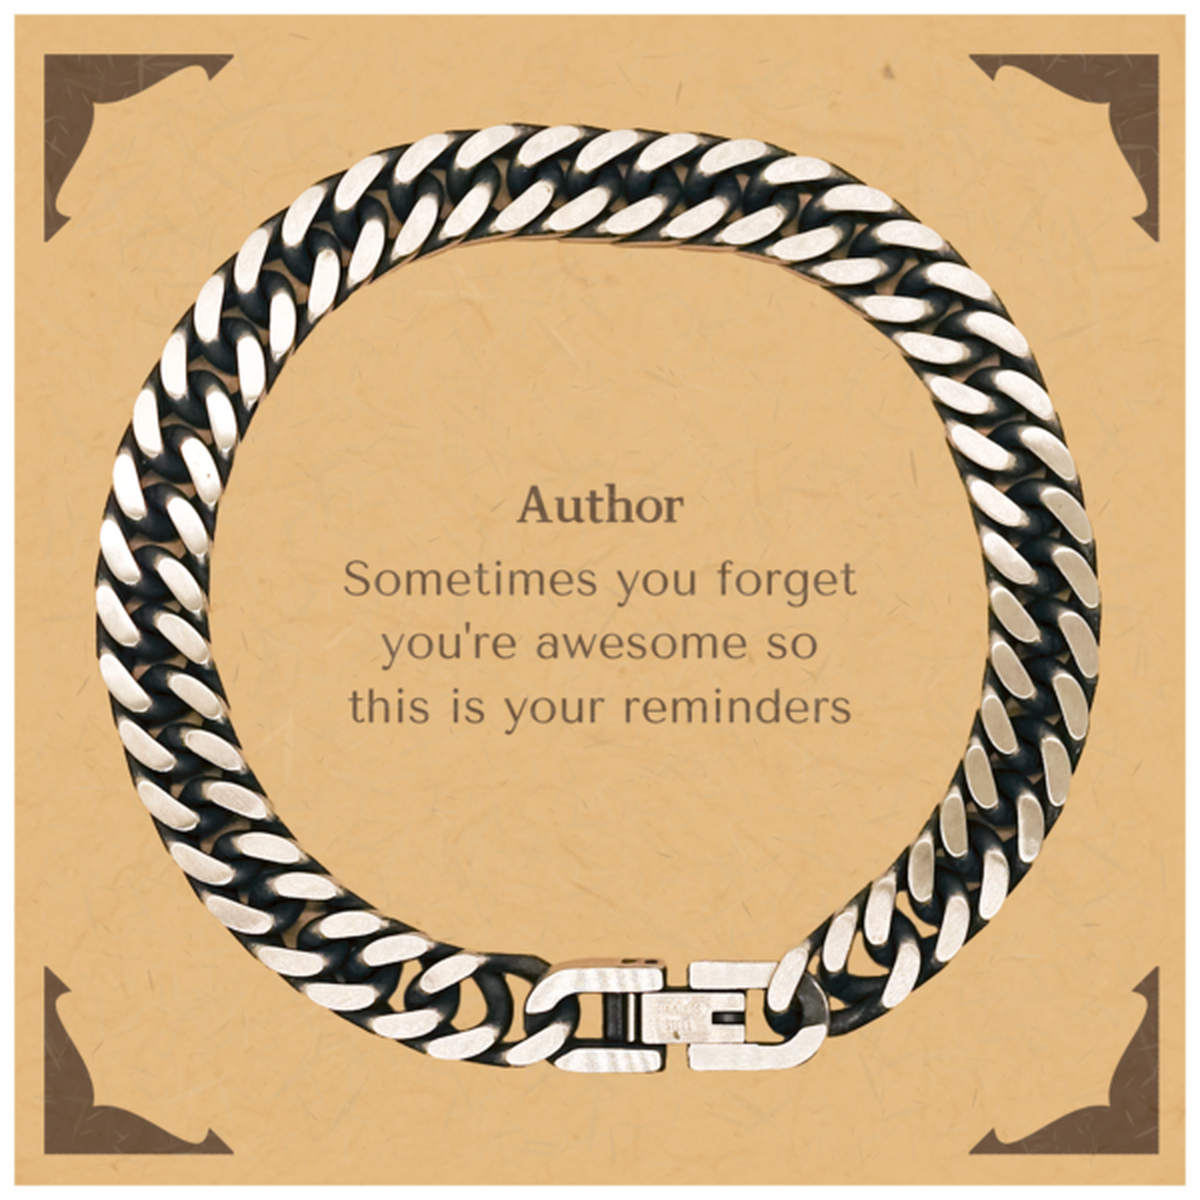 Sentimental Author Cuban Link Chain Bracelet, Author Sometimes you forget you're awesome so this is your reminders, Graduation Christmas Birthday Gifts for Author, Men, Women, Coworkers